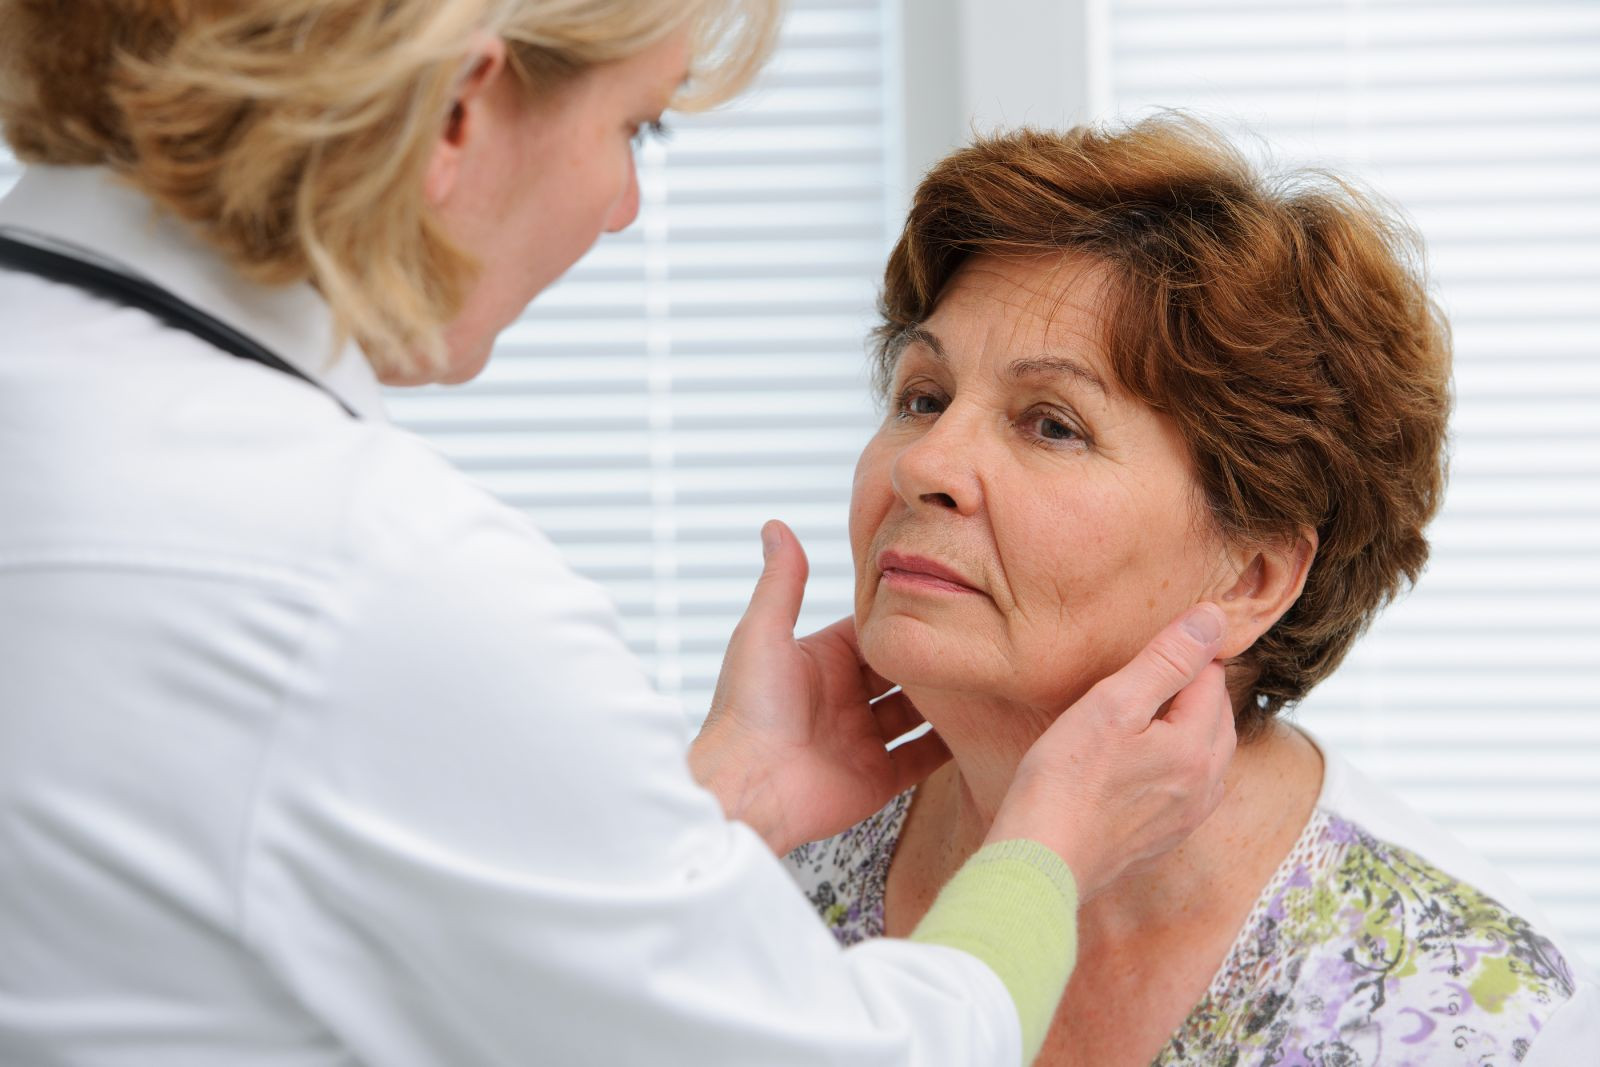 Hypothyroidism symptoms and signs in an older person